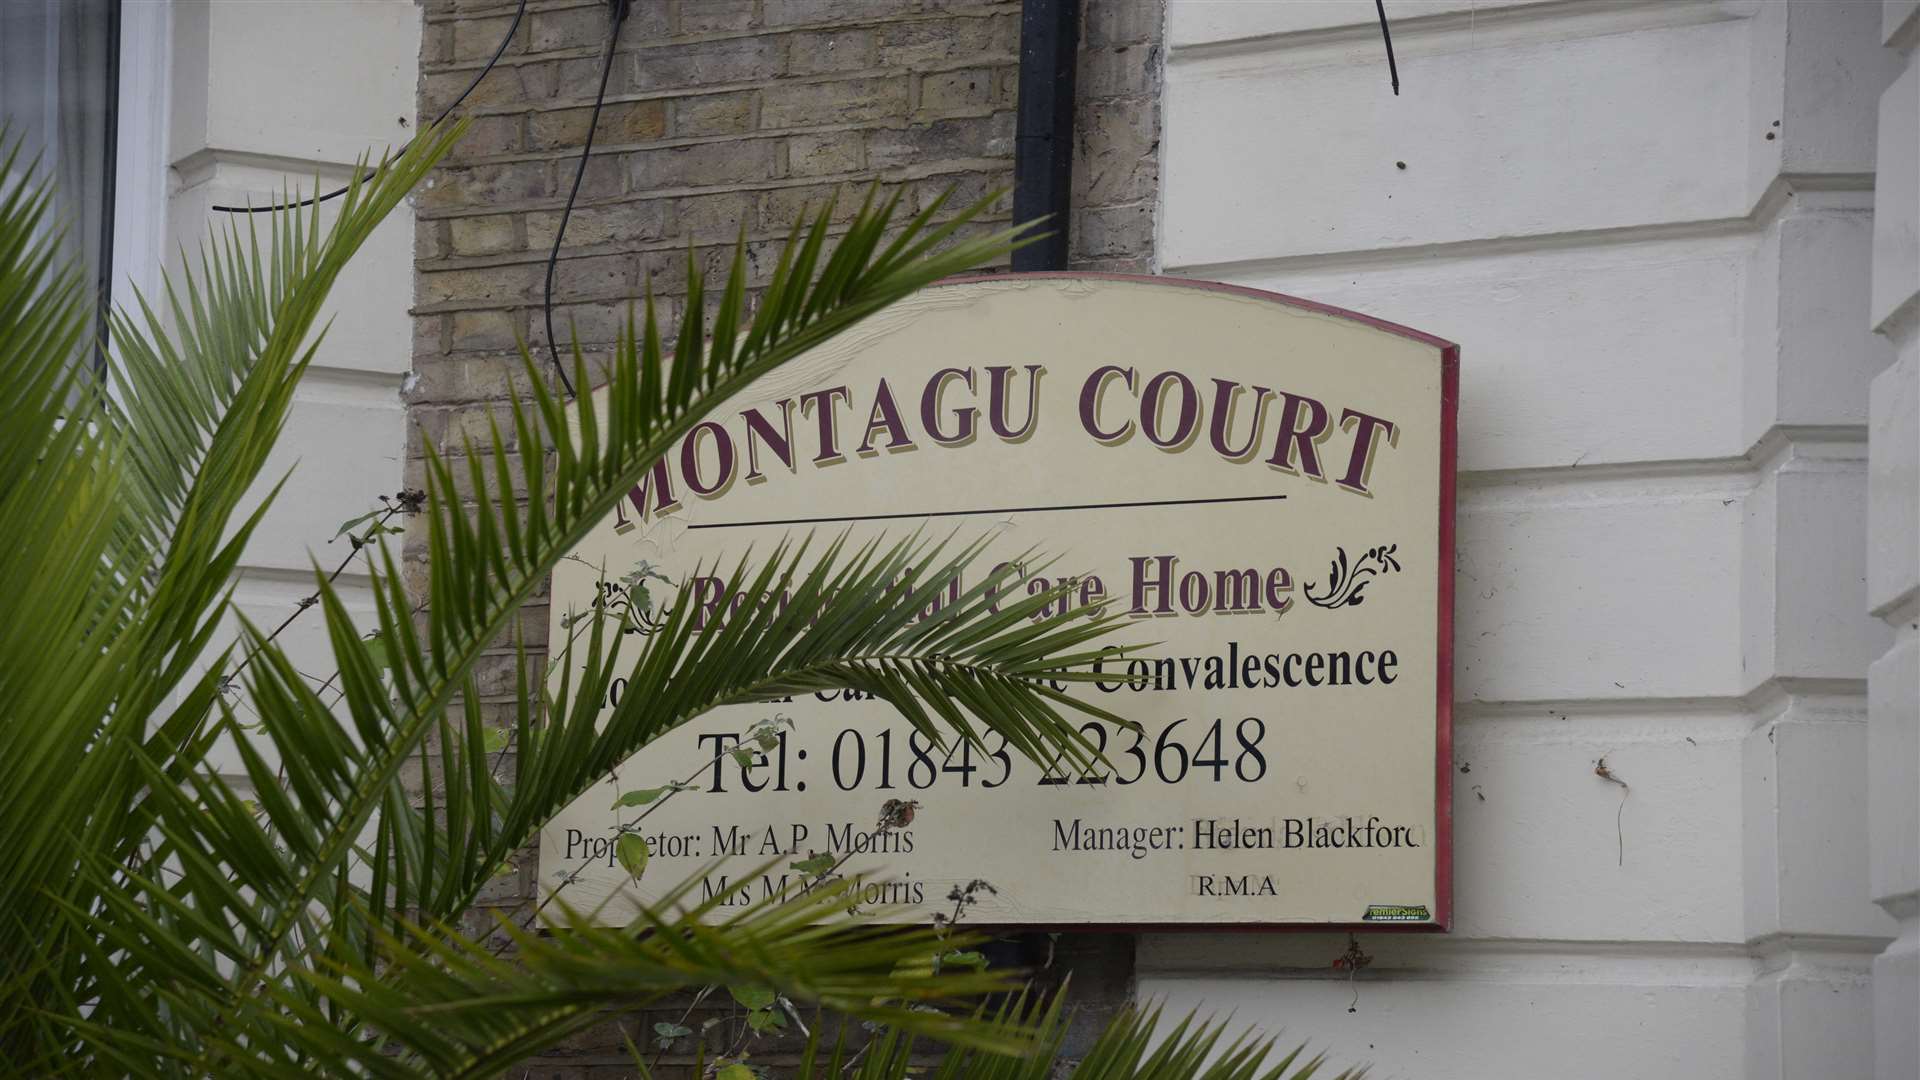 The Montagu Court Residential Home in Edgar Road, Margate